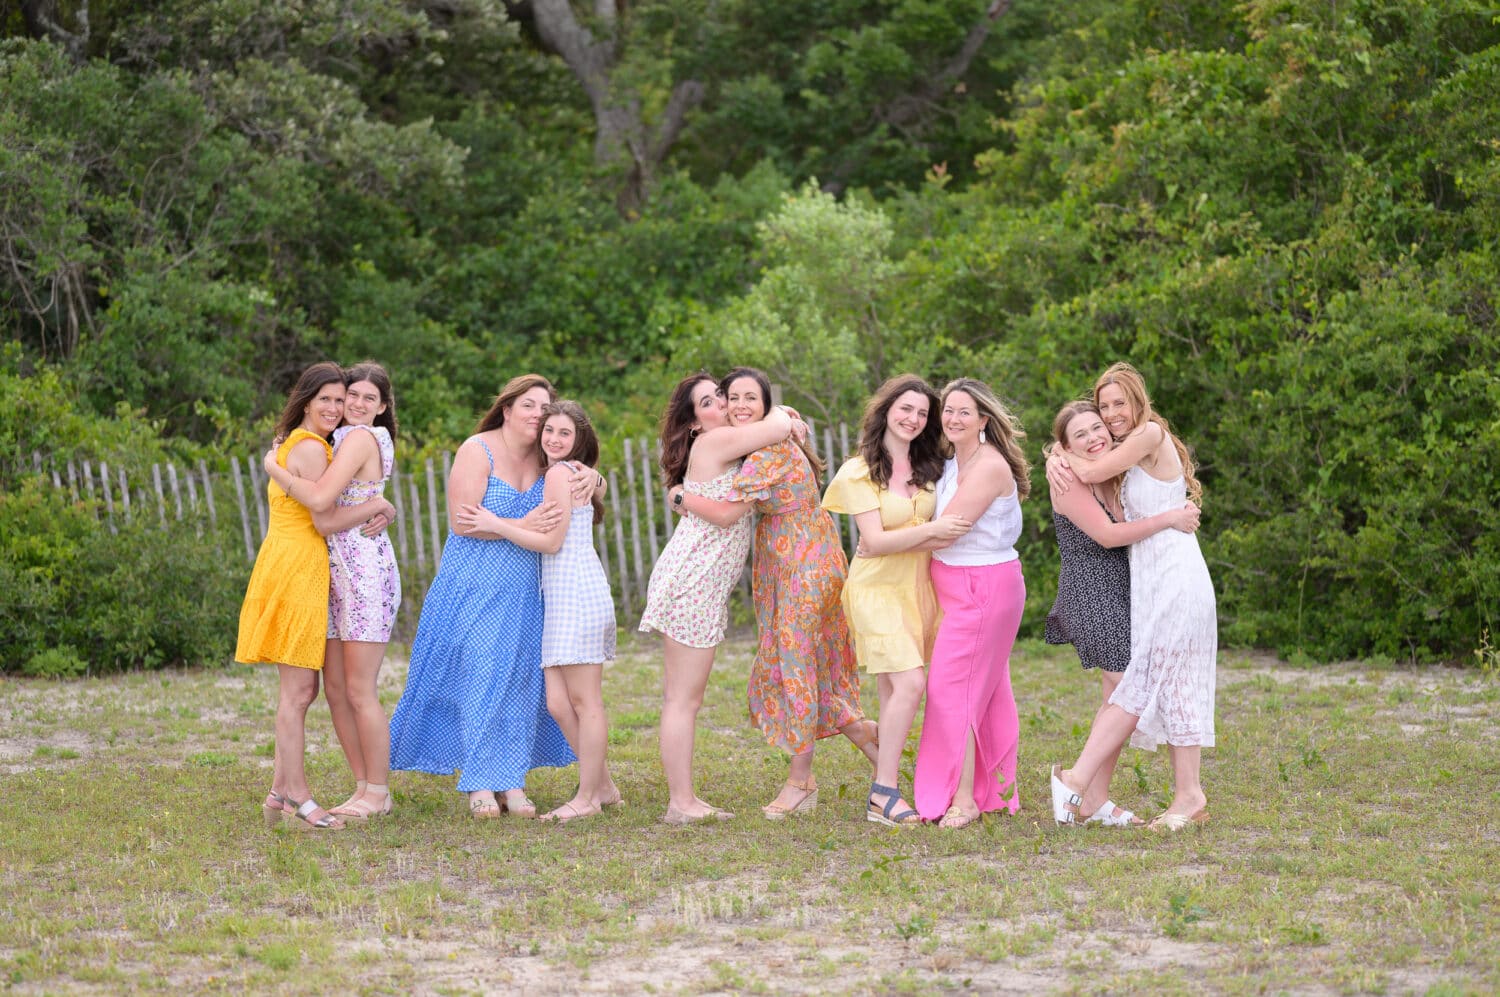 Senior portraits with 5 girls at the same time - Myrtle Beach State Park